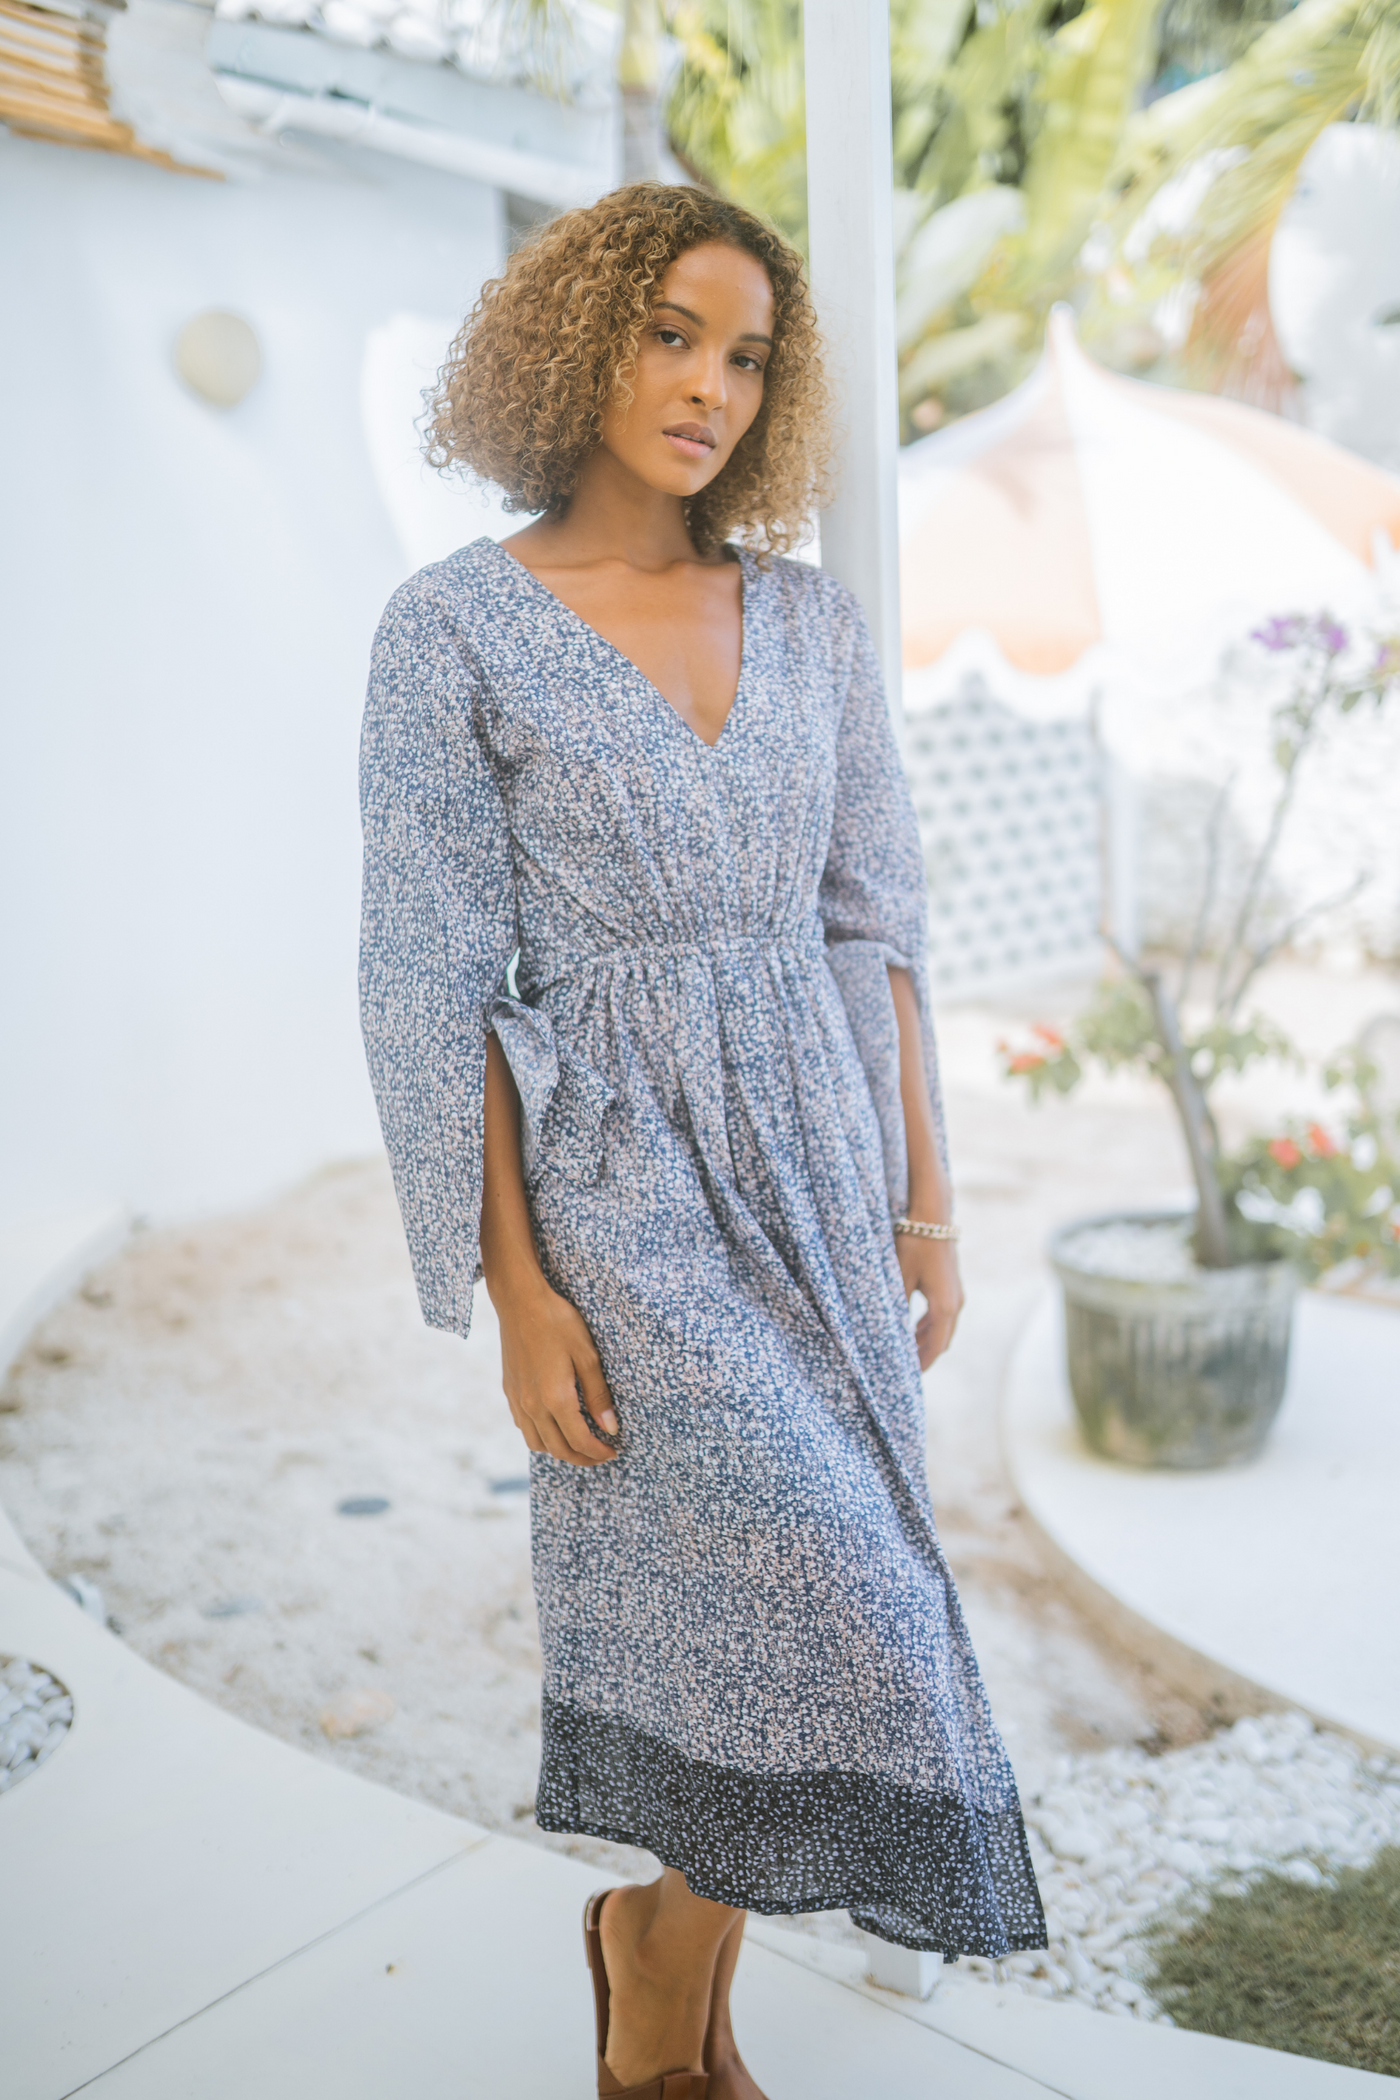 One Puram Chela Dress in Blue Stone, available on ZERRIN with free Singapore shipping